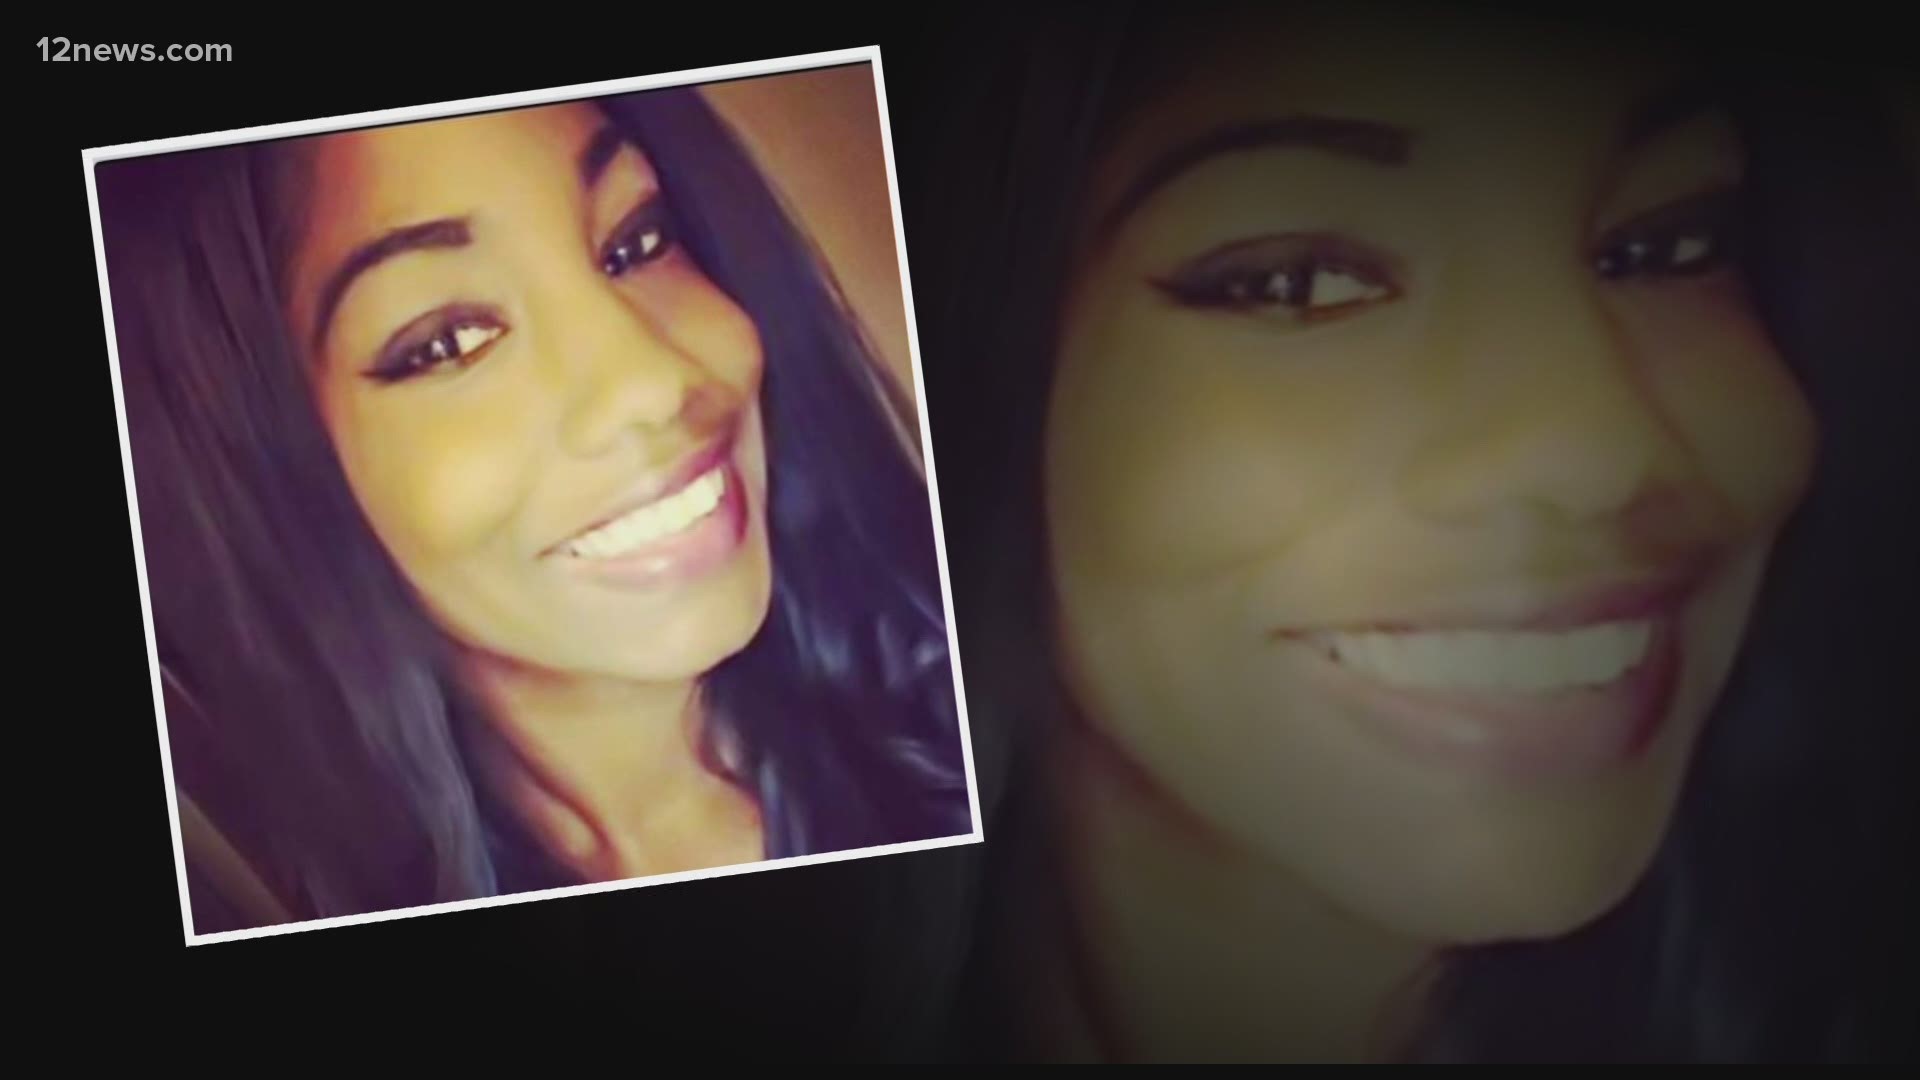 Shavone Robinson, 30, was found dead in her Phoenix apartment in May. Three of her kids were also found in her apartment. Her family is still seeking answers.